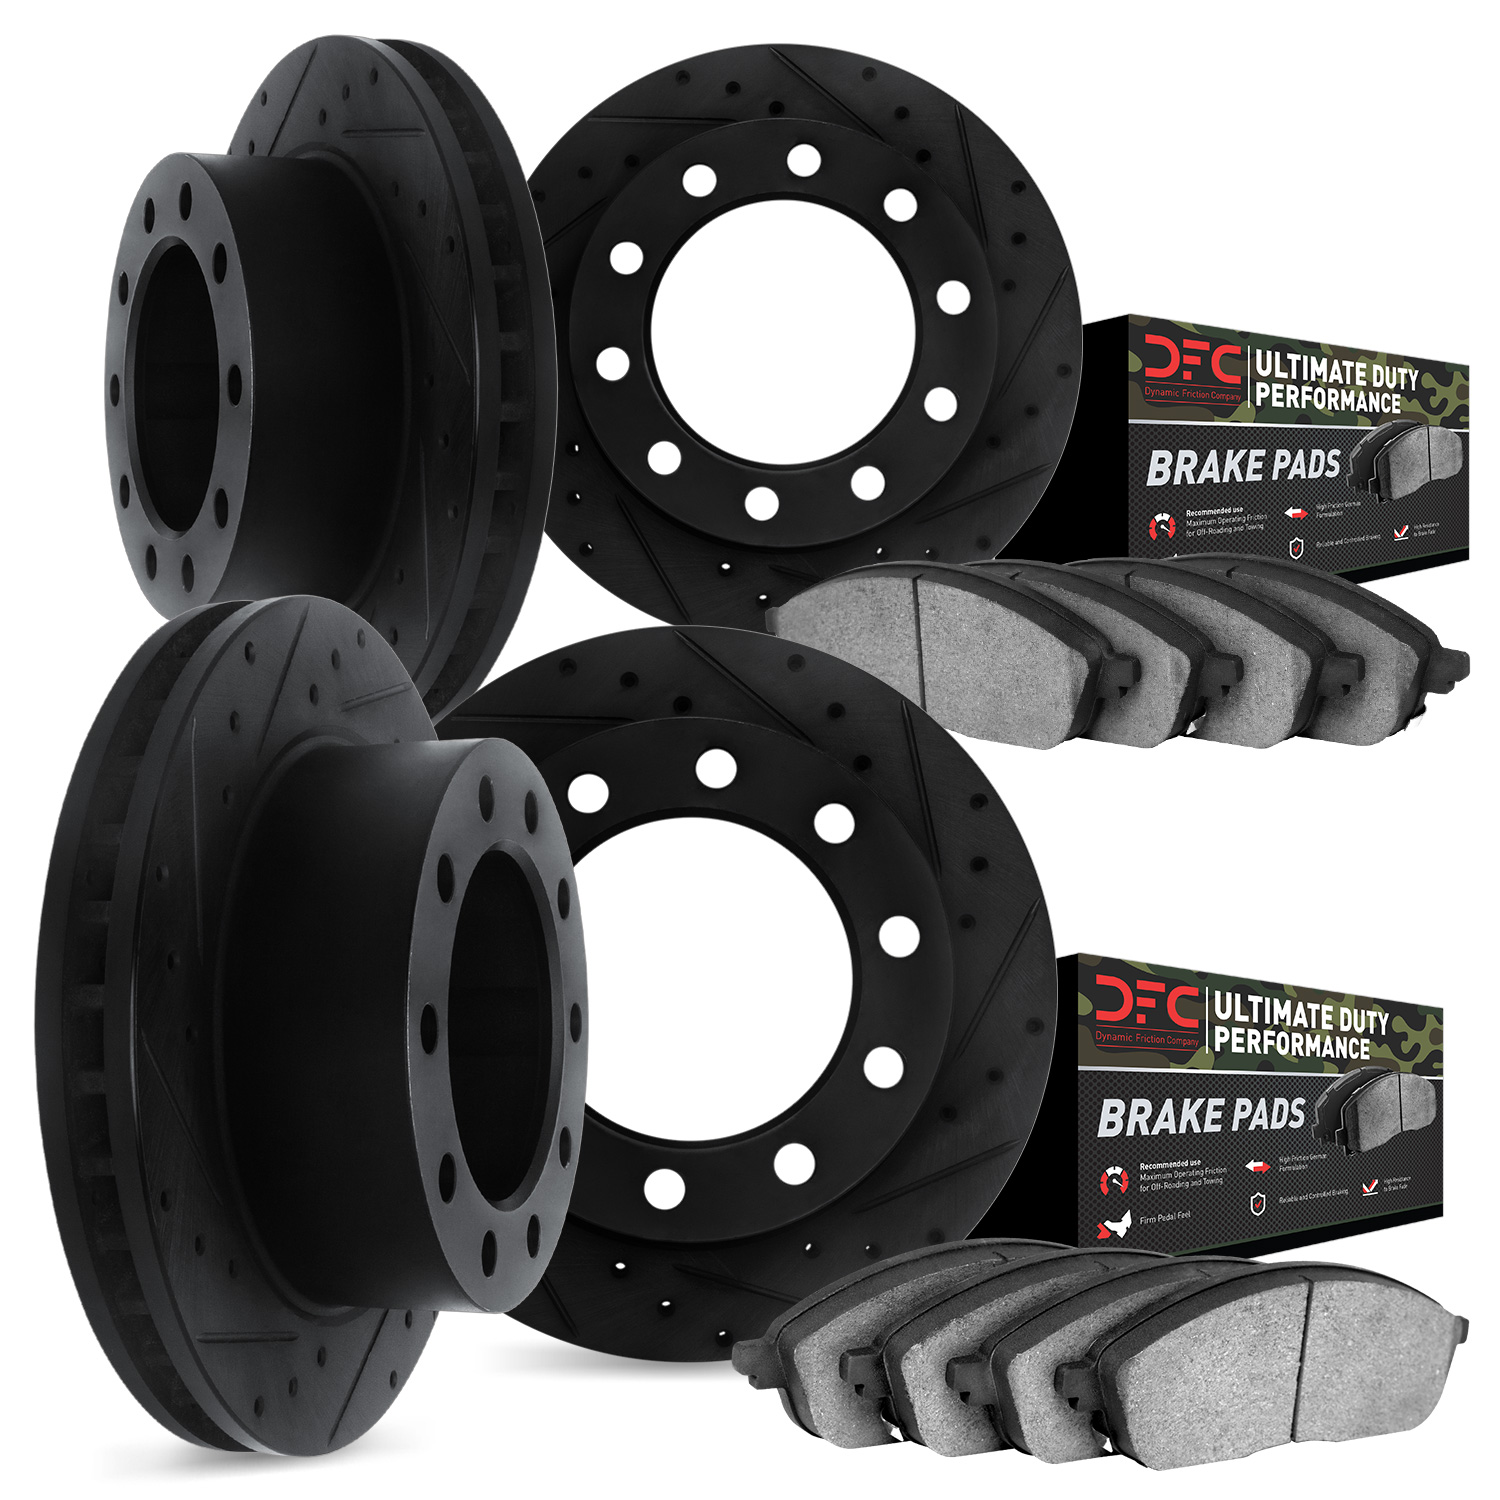 8404-54029 Drilled/Slotted Brake Rotors with Ultimate-Duty Brake Pads Kit [Black], 2002-2005 Ford/Lincoln/Mercury/Mazda, Positio